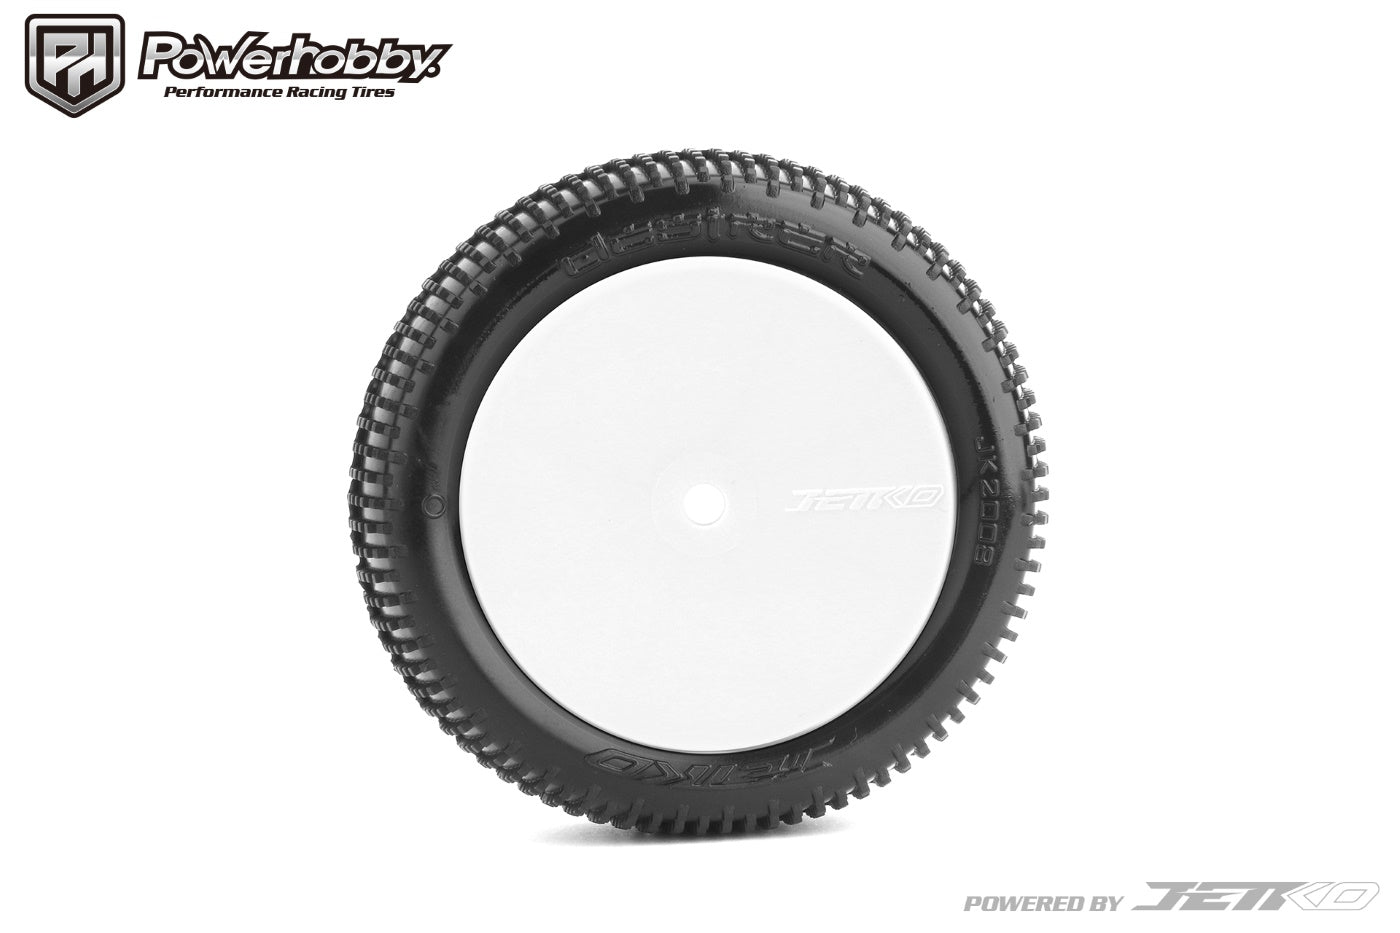 Powerhobby Desirer 1/10 2WD Front Buggy Clay Mounted Tires Medium Soft White - PowerHobby